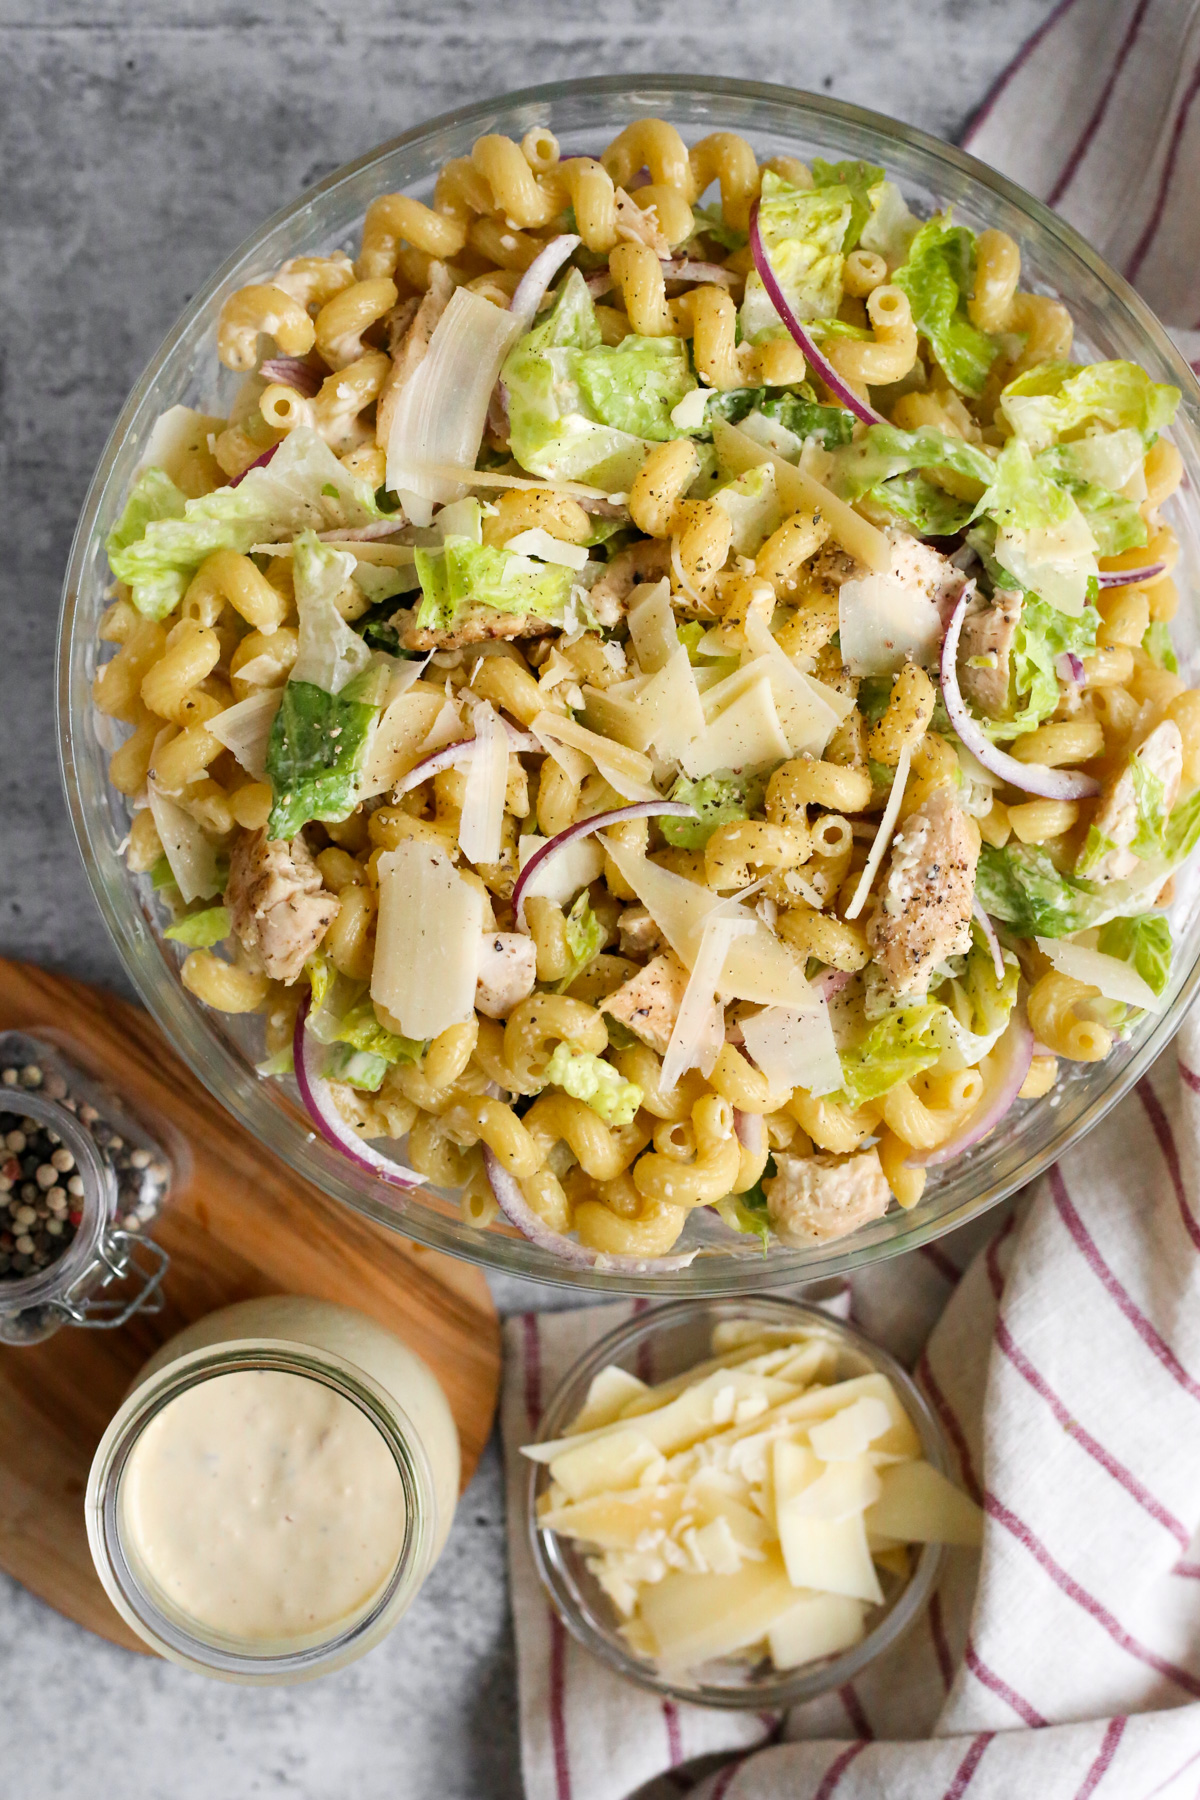 An overhead view of a creamy chicken Caesar pasta salad in a clear glass mixing bowl. The salad features cooked pasta, tender chicken pieces, crisp romaine lettuce, sliced red onions, and grated Parmesan cheese. The creamy Caesar dressing coats the ingredients, creating a delicious and visually appealing dish